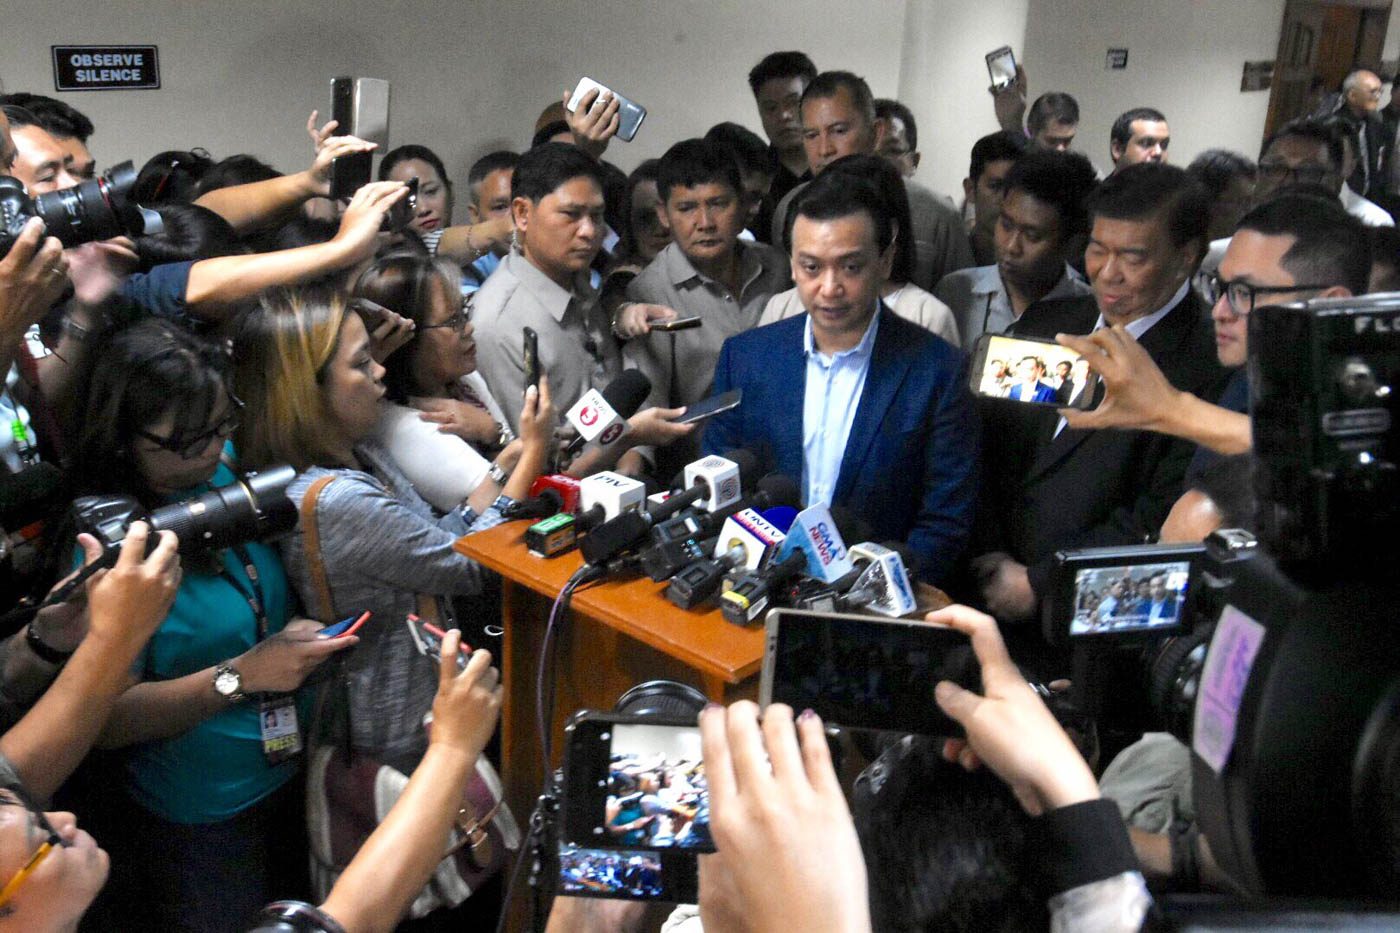 FRENZY. Senator Trillanes finds himself surrounded by the media on September 4, as he is caught by surprise by the proclamation ordering the revocation of his amnesty. Photo by Angie de Silva/Rappler     